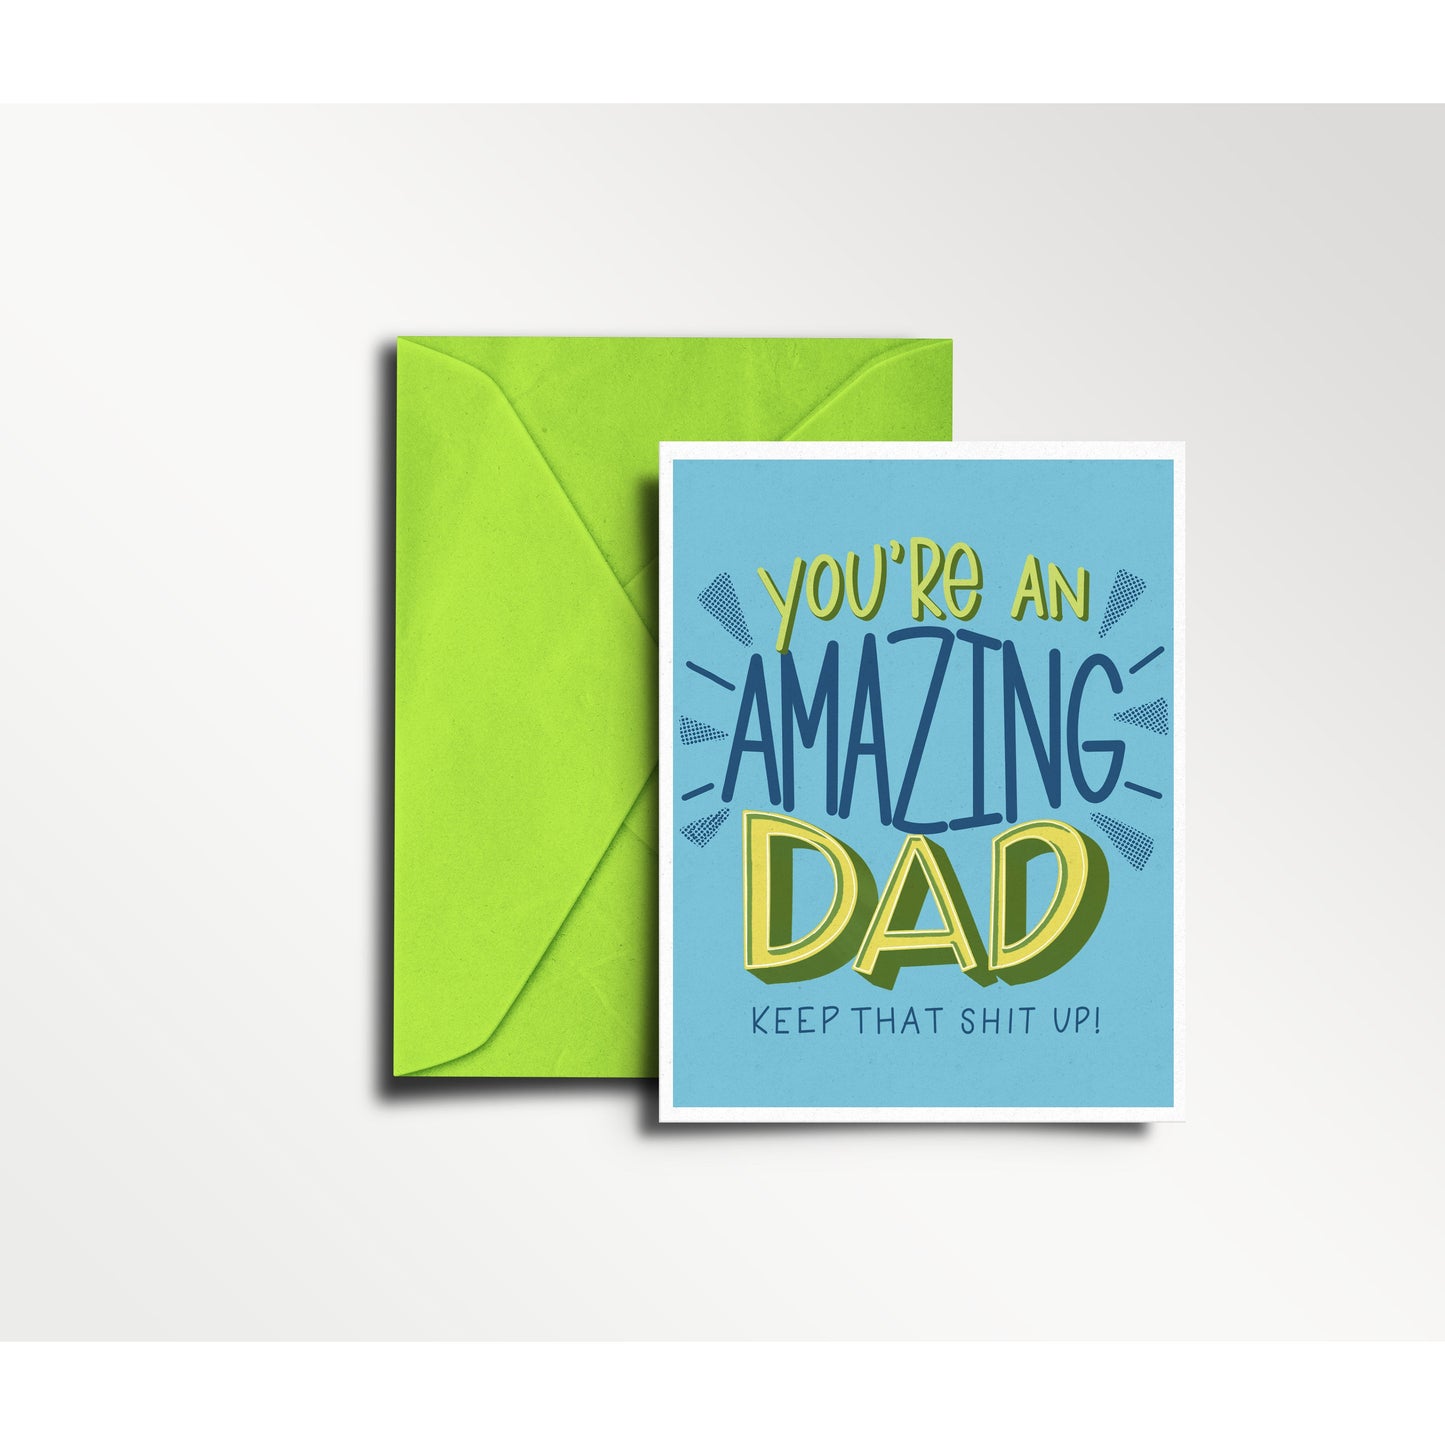 You're an Amazing Dad (Keep that Sh*t Up) - Father's Day